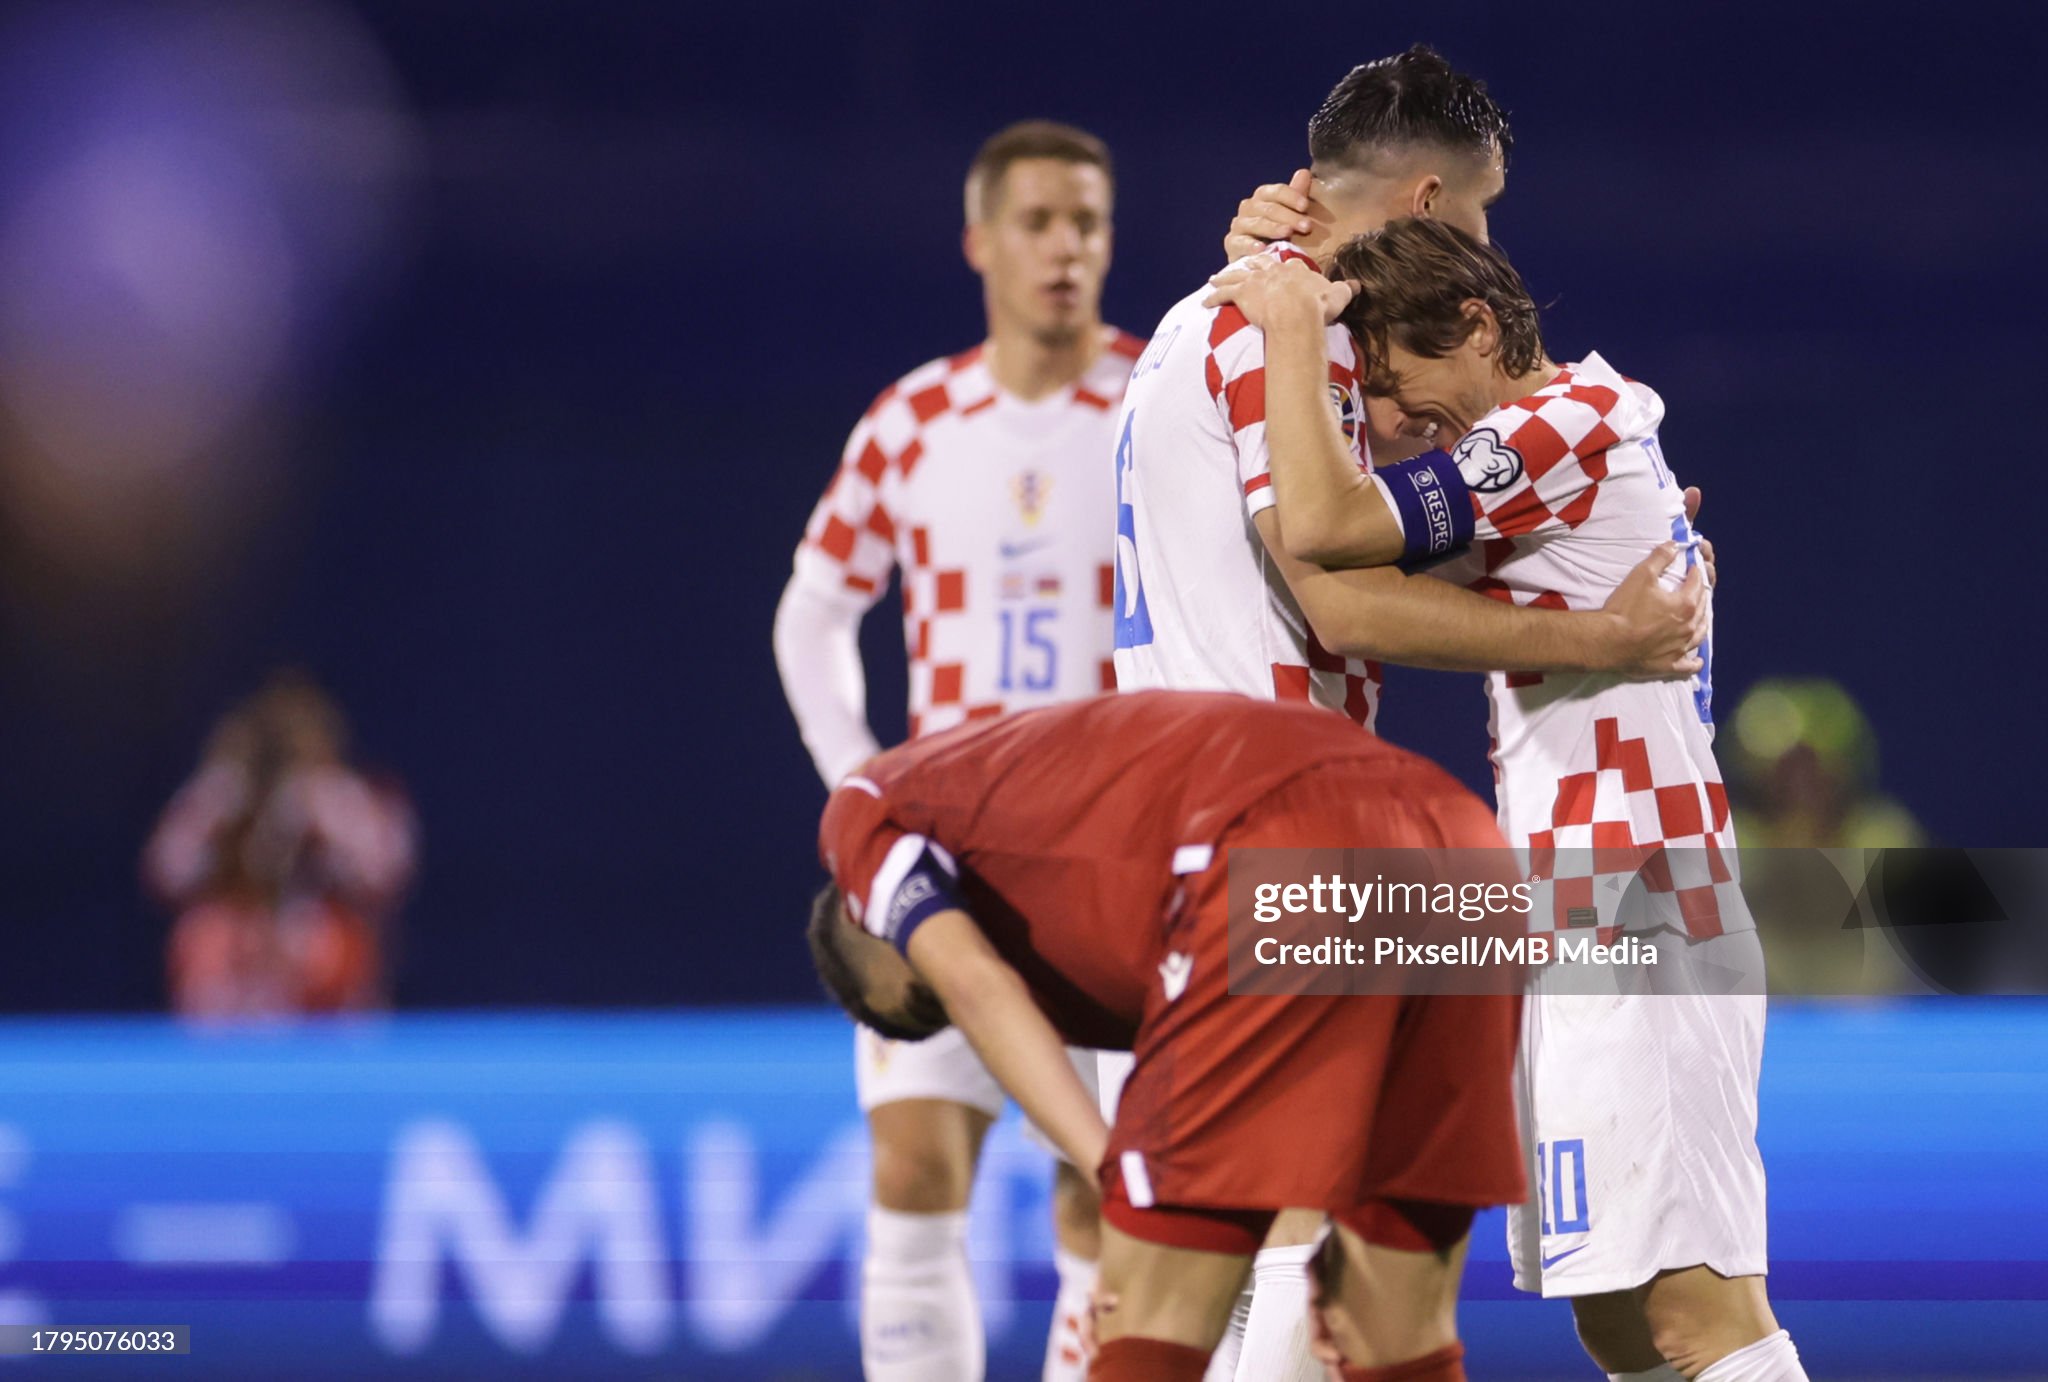 Ajax player Sosa plays an important role in Croatia's qualification